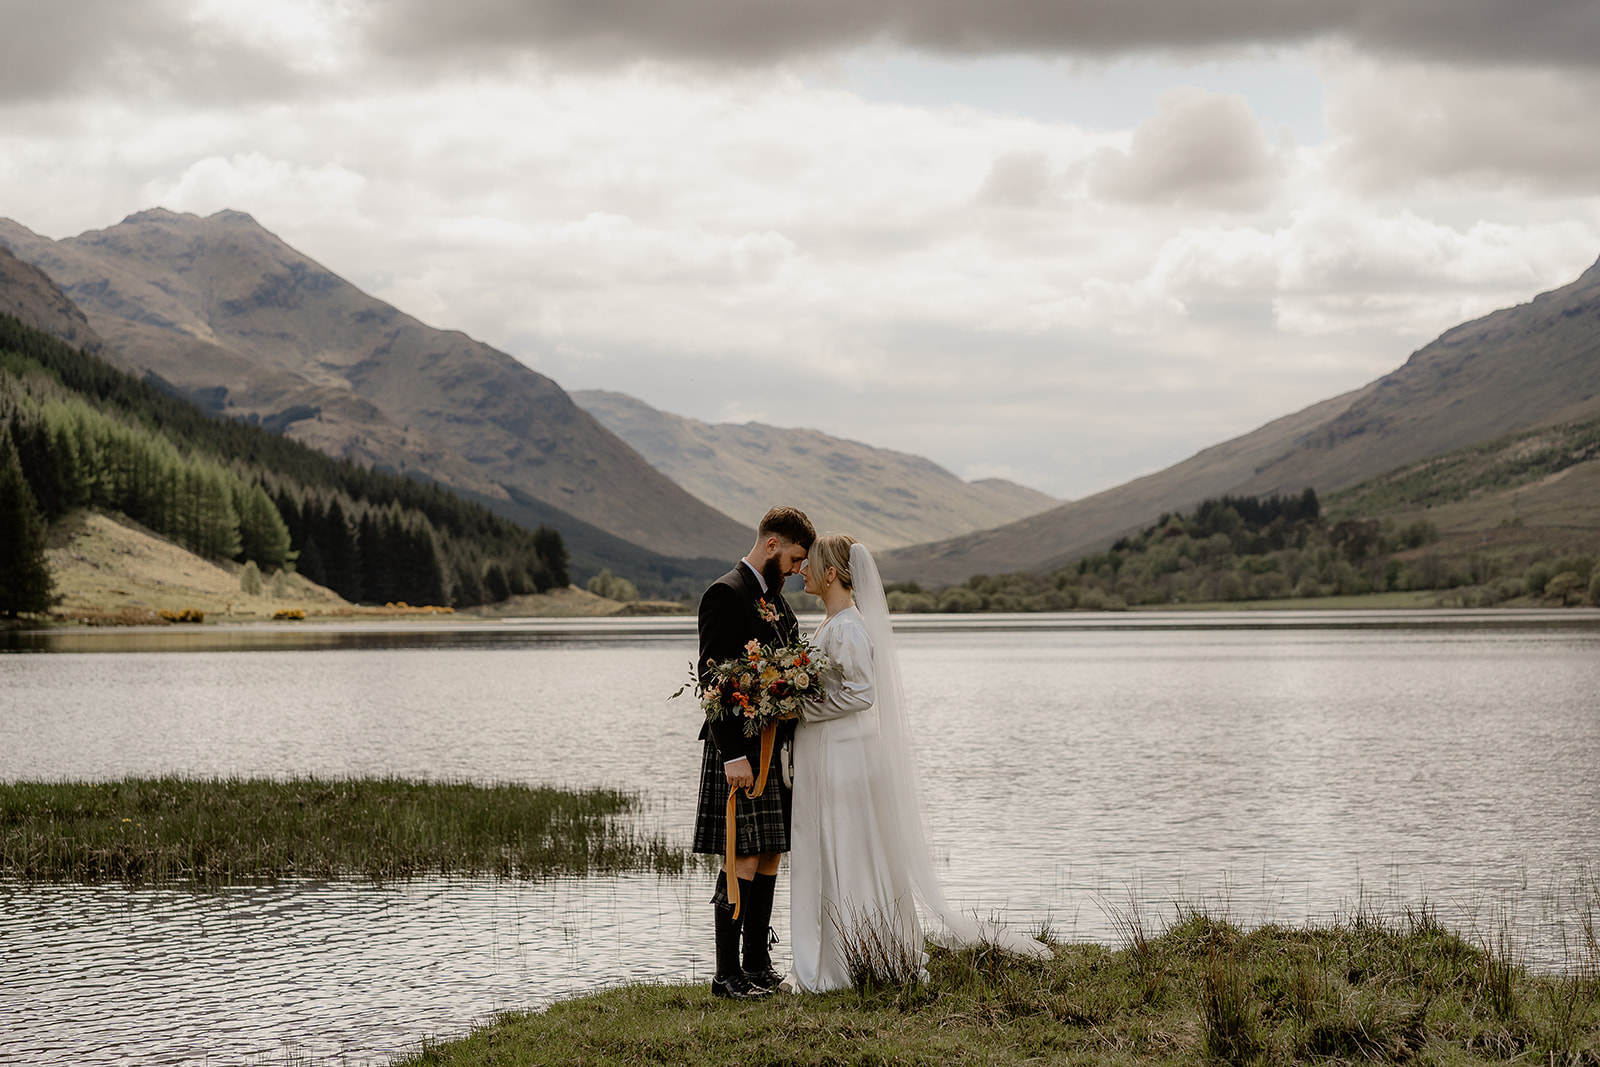 highland elopement at monachyle mhor. couple embrace next to loch with dramatic mountains and sky behind them